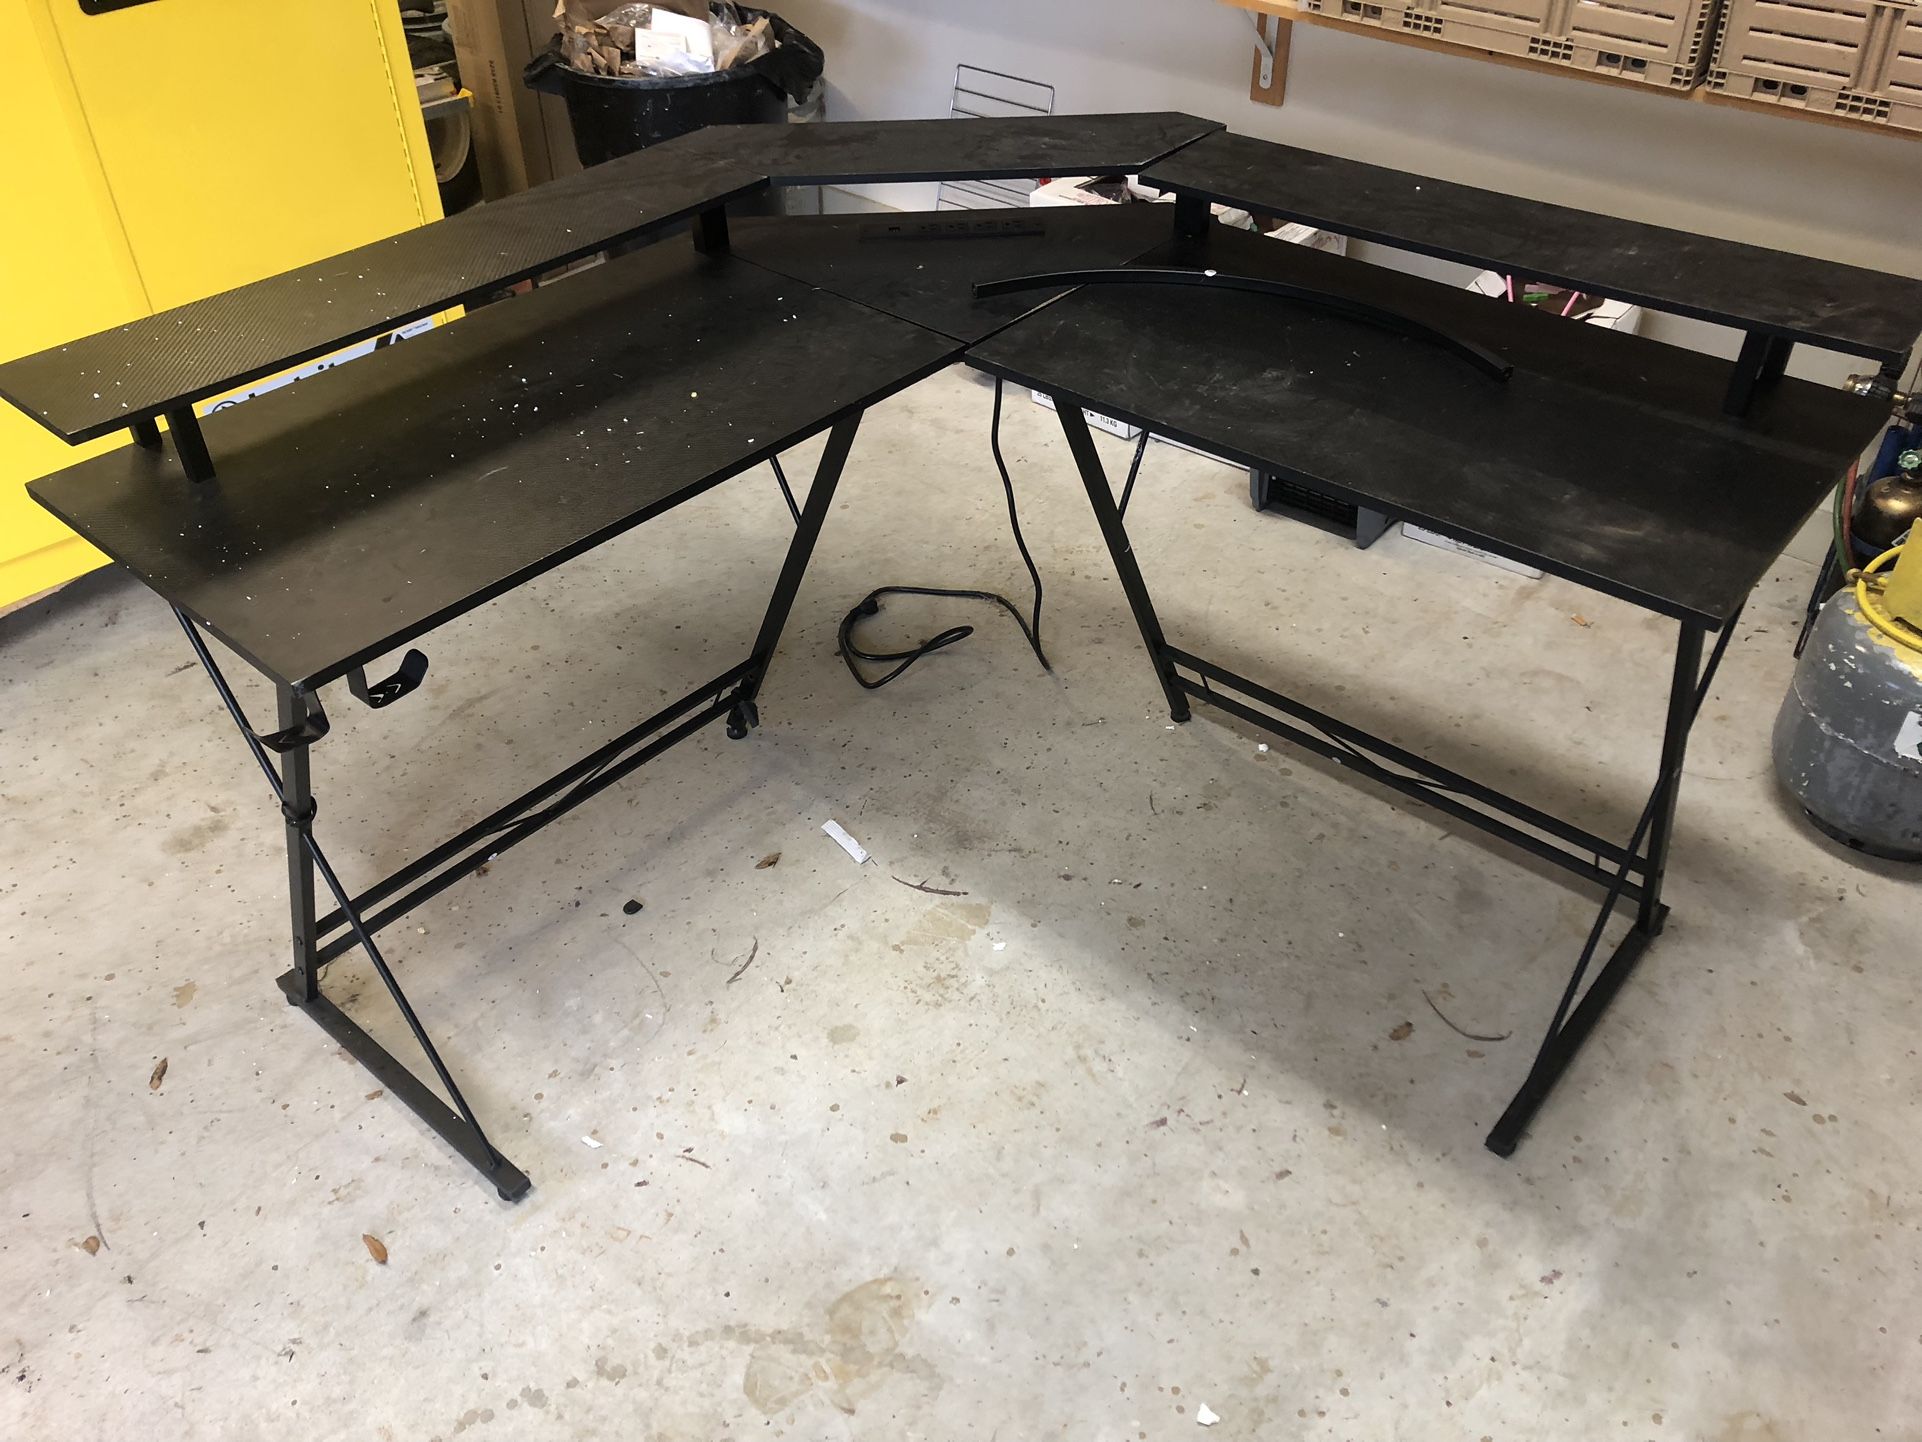 Desk With Outlet Strip $30